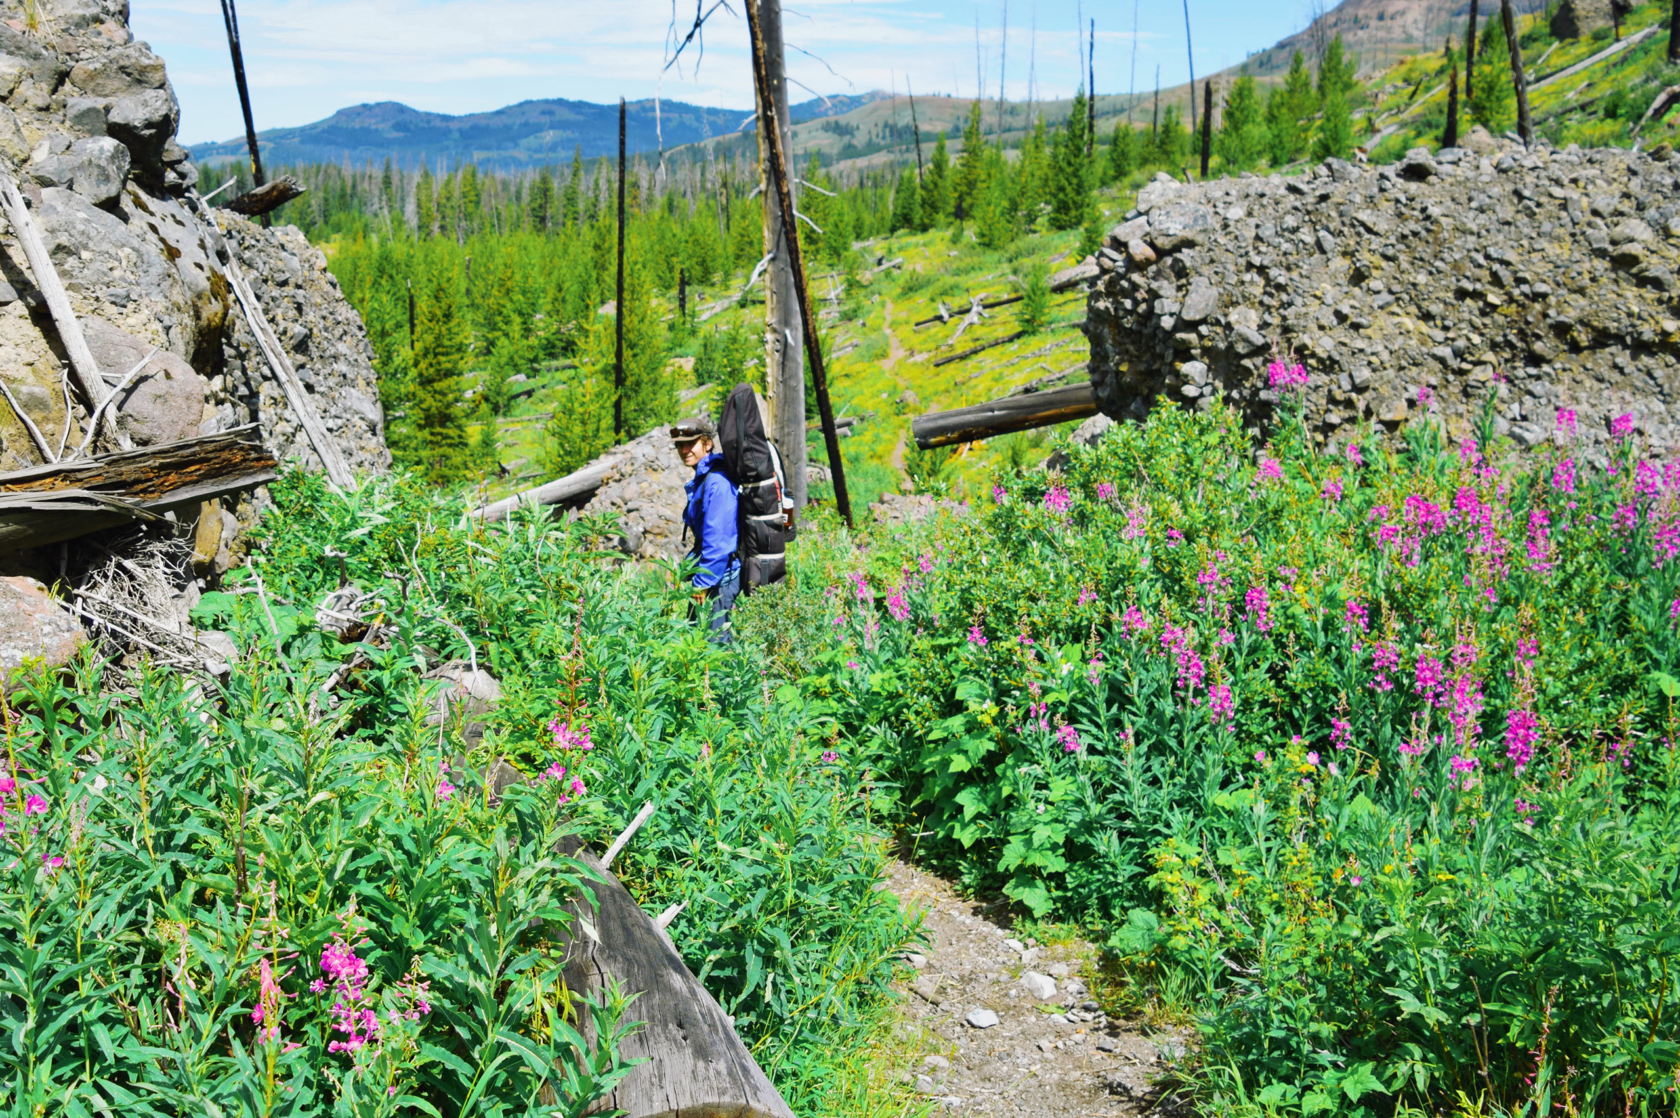 Person backpacking through wildflowers and greenery.